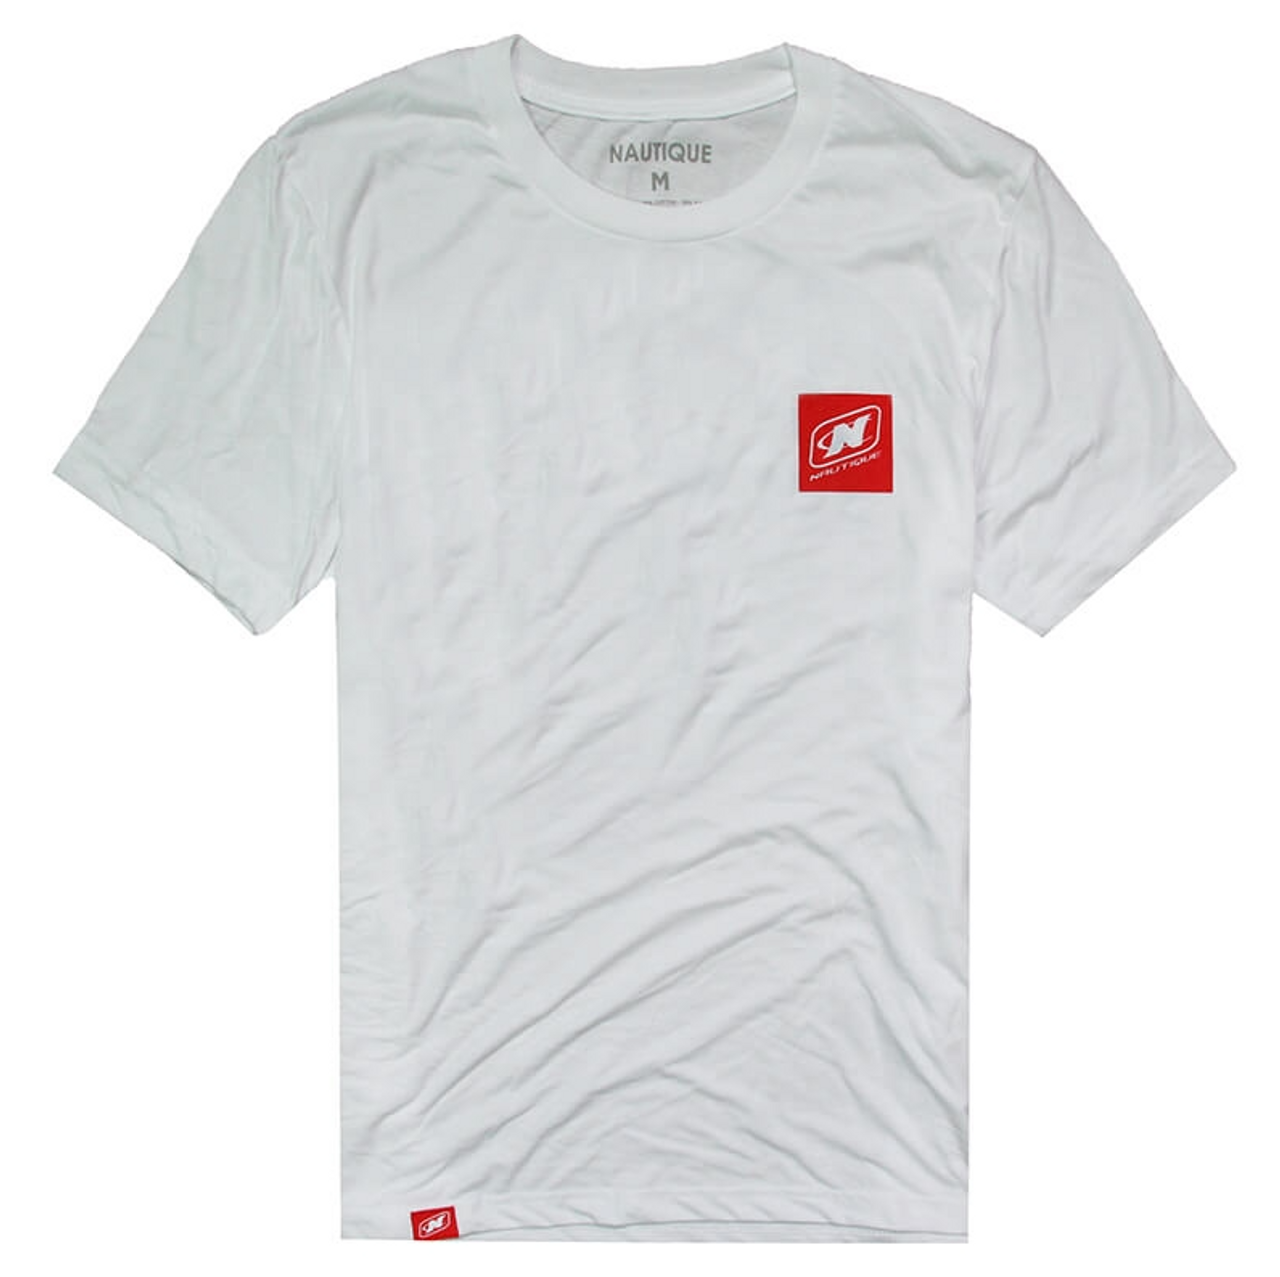 Nautique Color Me Tee- Solid White Triblend